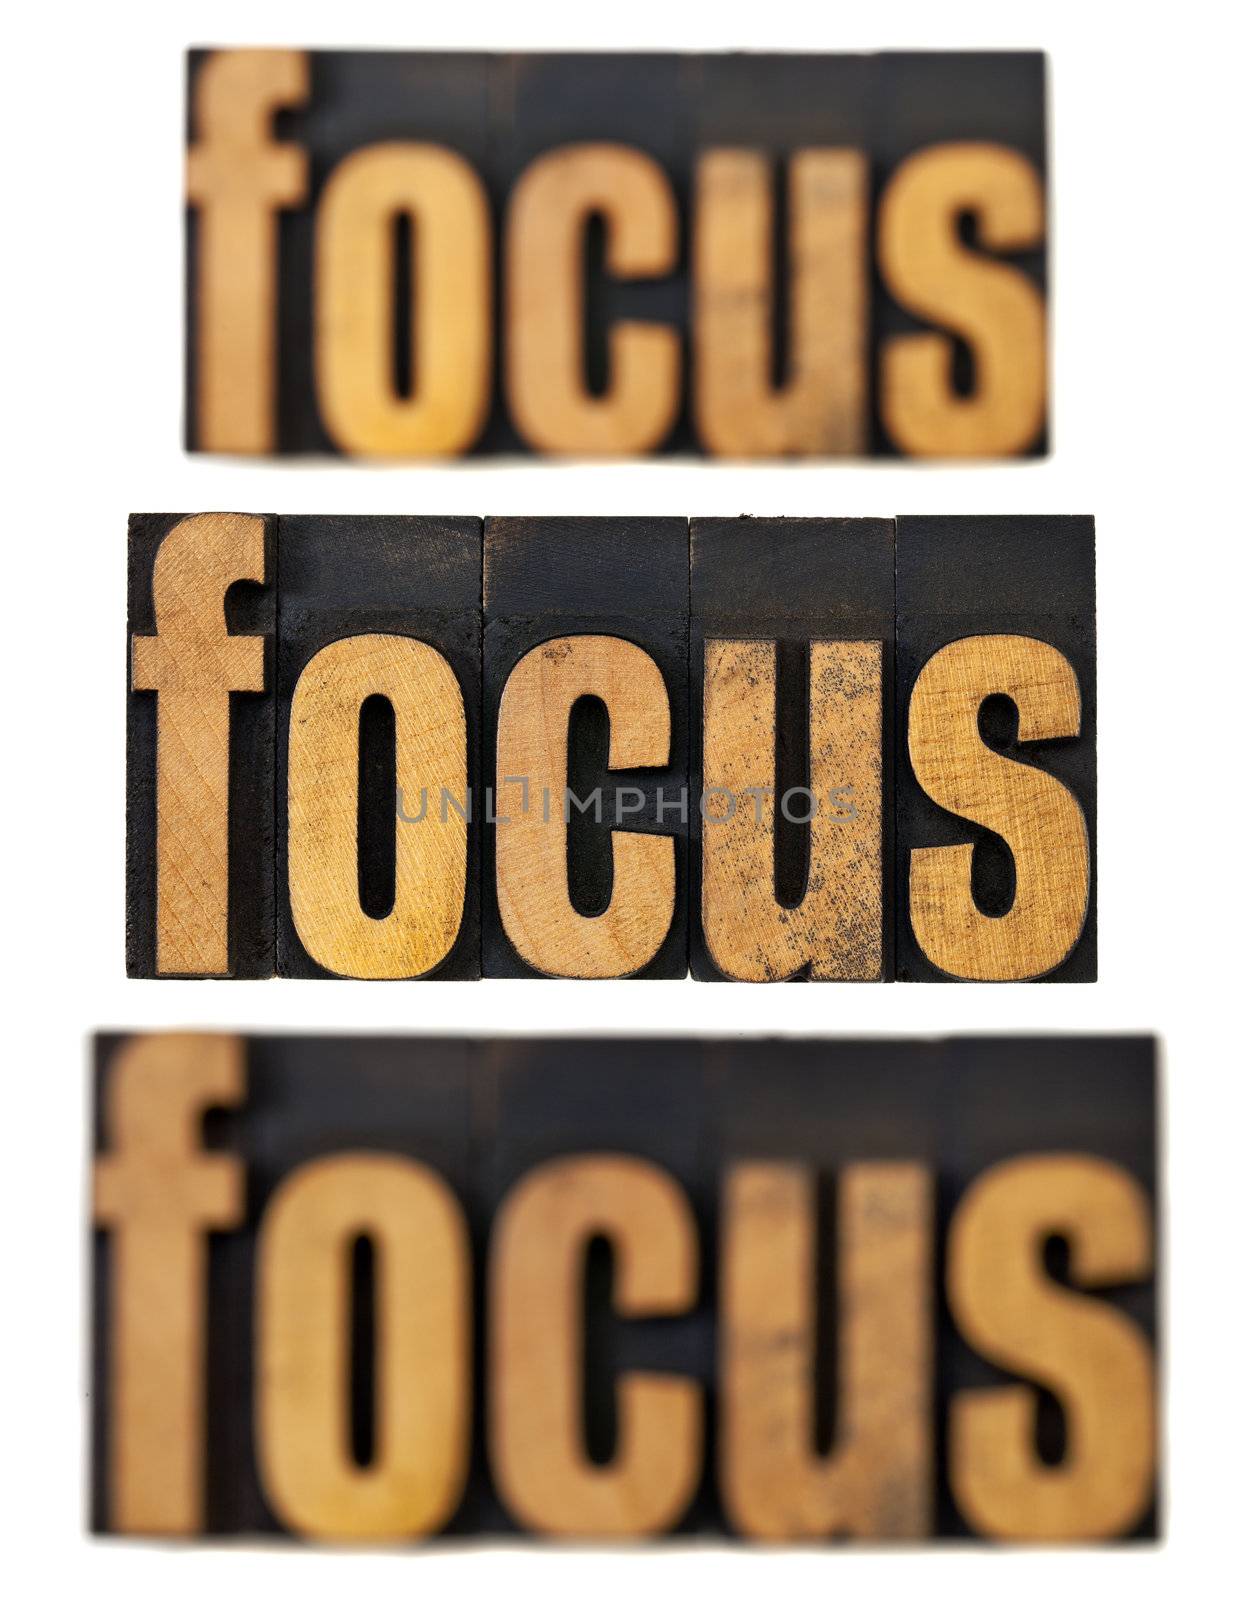 focus word in and out of focus  - a collage of isolated text in vintage letterpress wood type